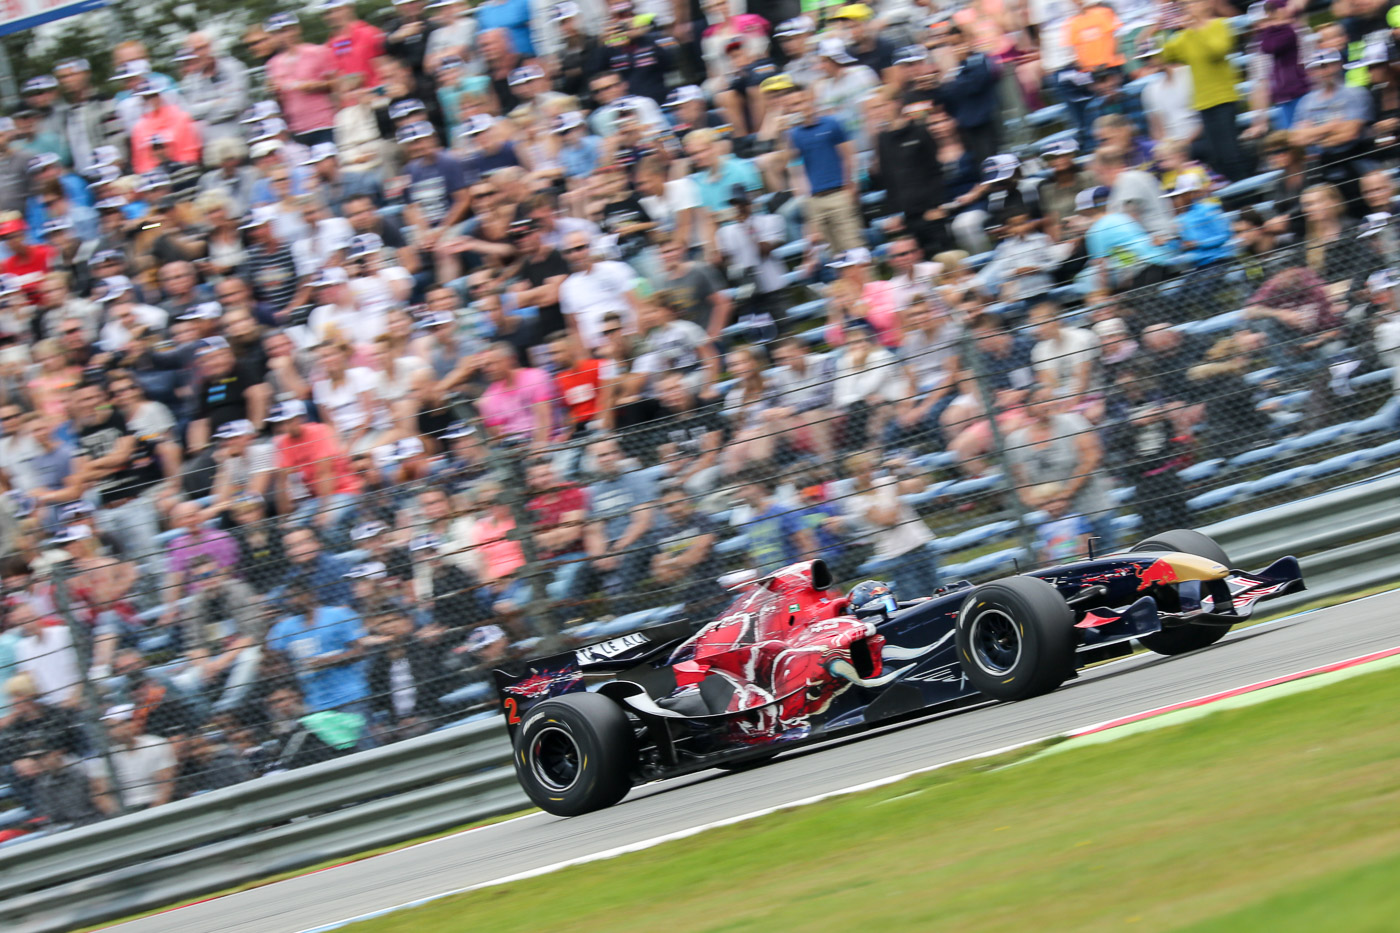 Ingo Gerstl in his STR1-F1 car in front of a packed crowd